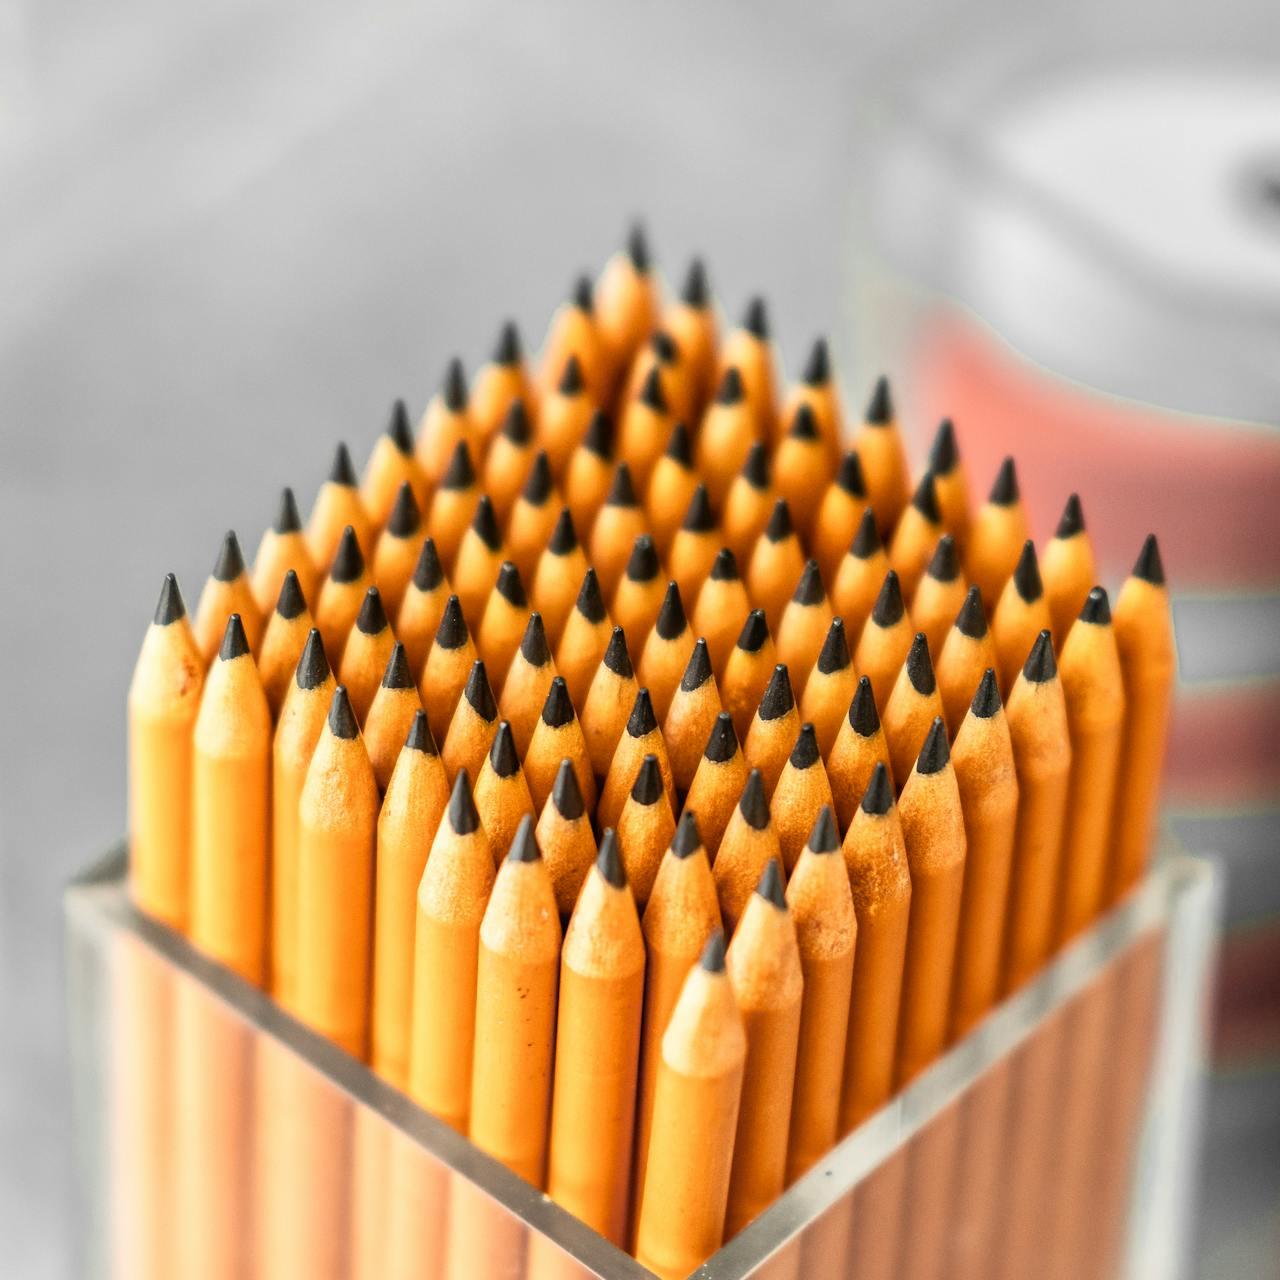 What Does It Mean to Dream of Pencils